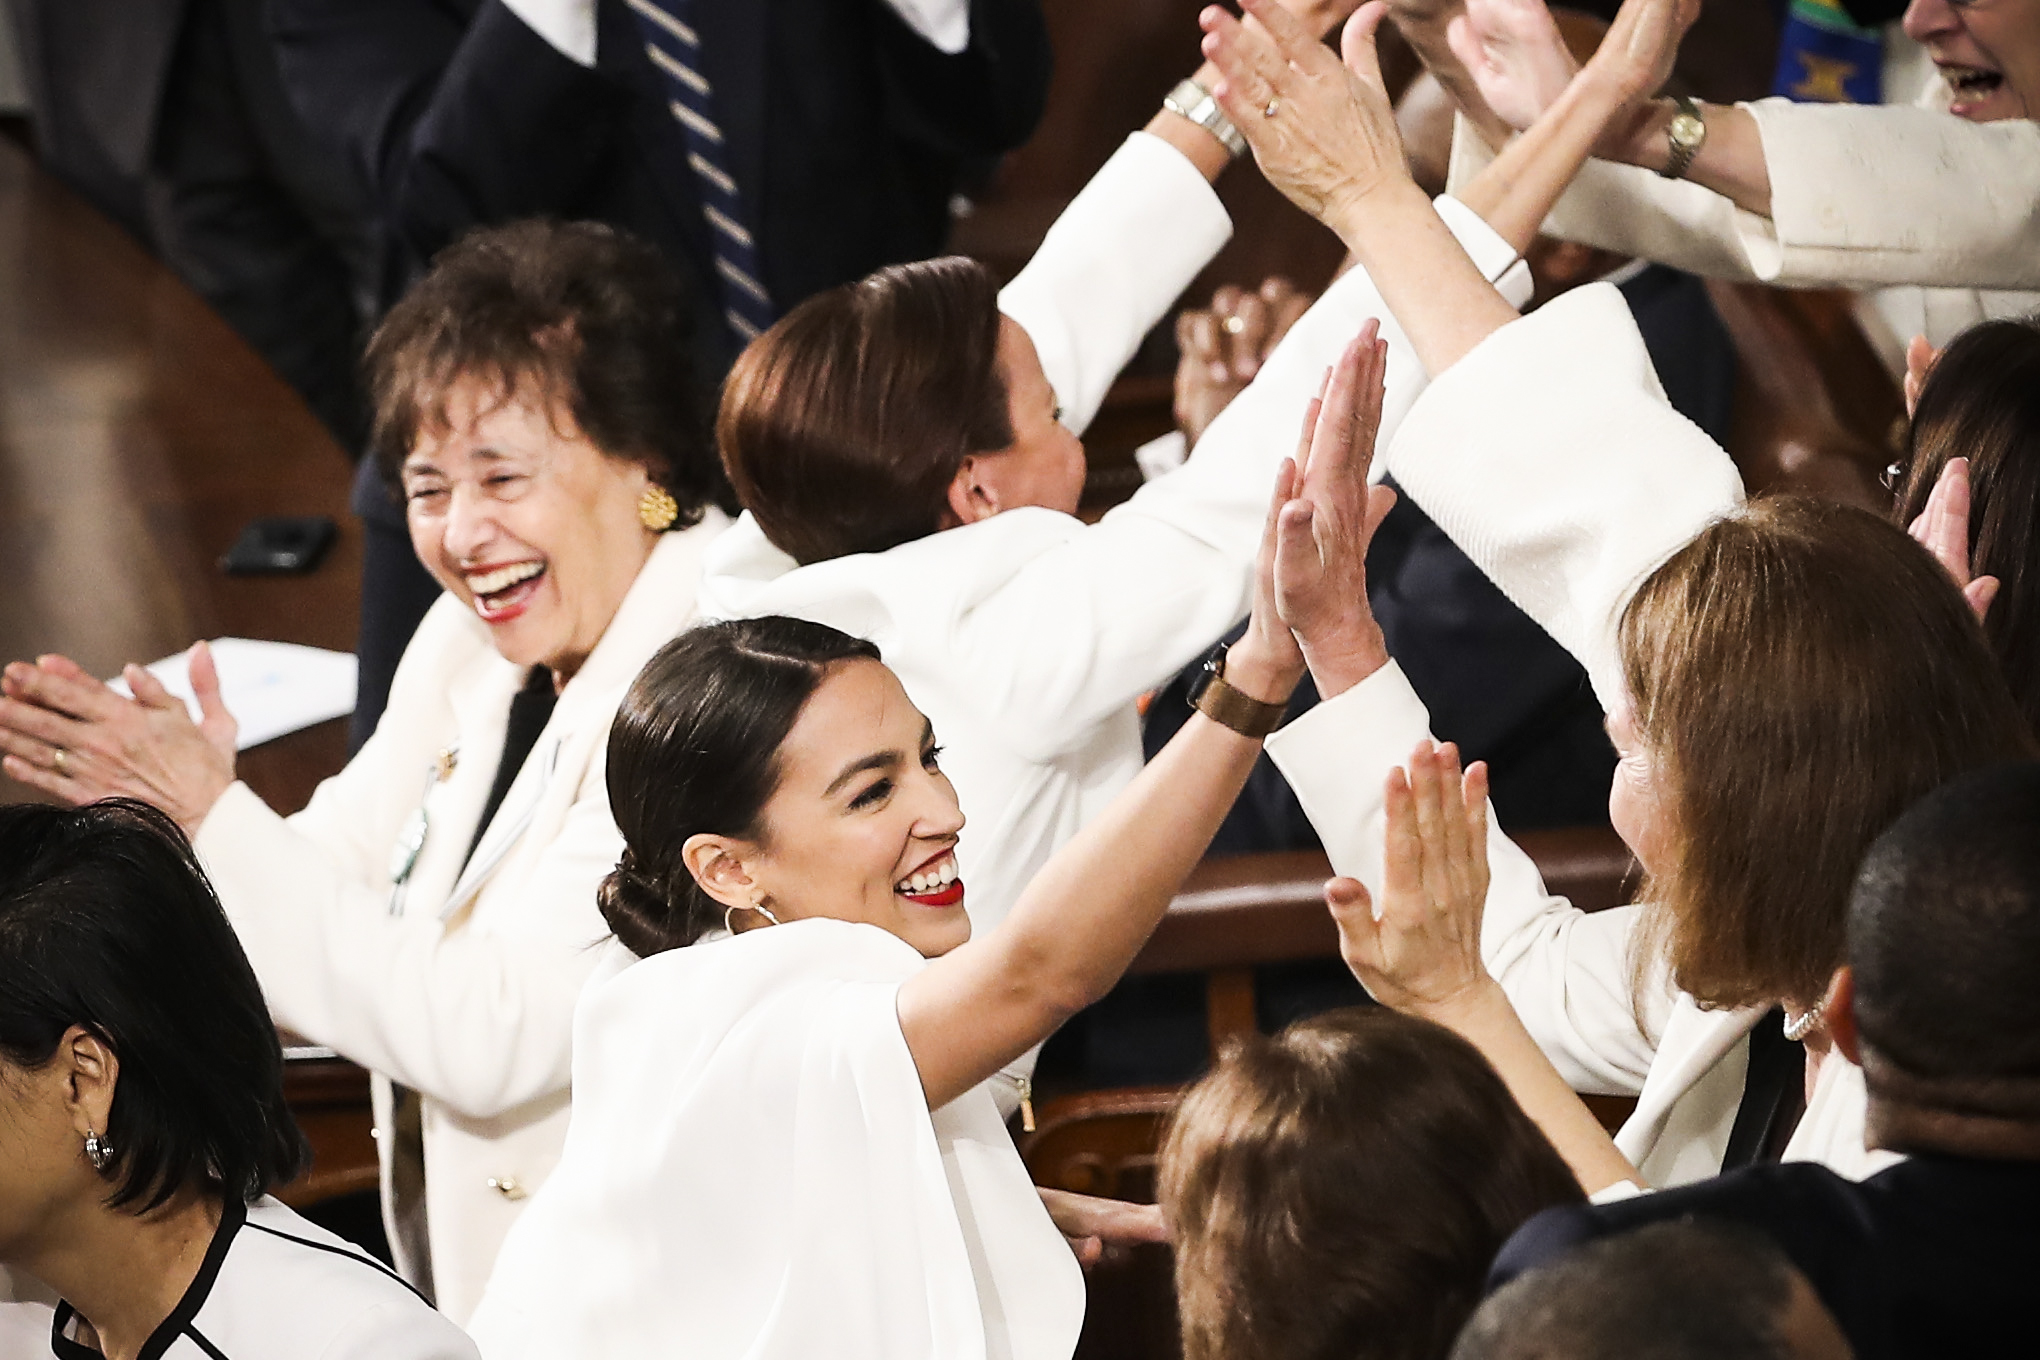 Rep. Alexandria Ocasio-Cortez (D-NY) and other female lawmakers cheer during President Trump’s State of the Union address.